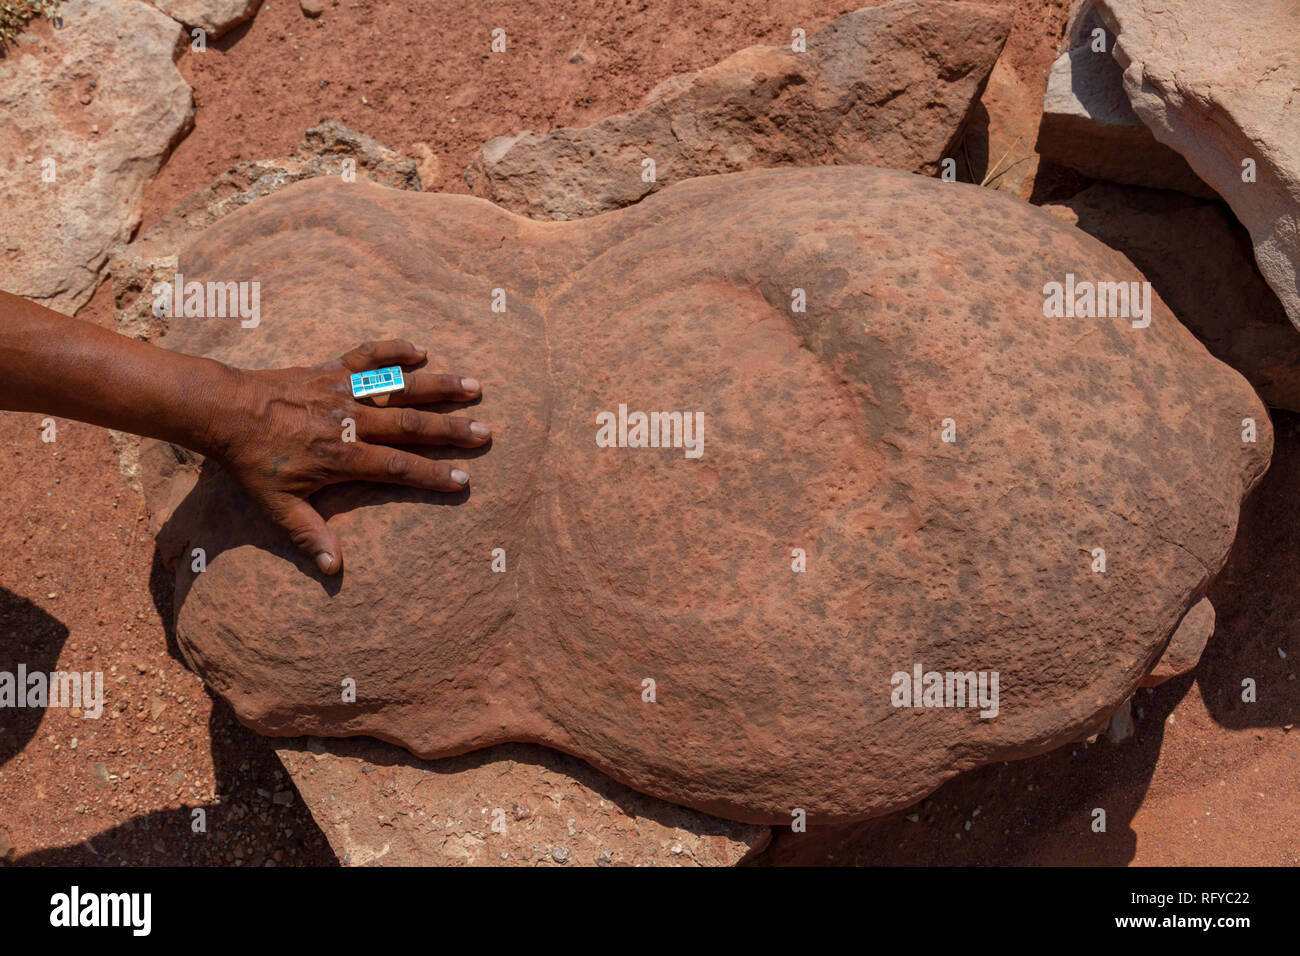 Geological concretions with a mans hand for scale, Moenkopi Dinosaur Tracks site near Tuba City, Arizona, United States. Stock Photo